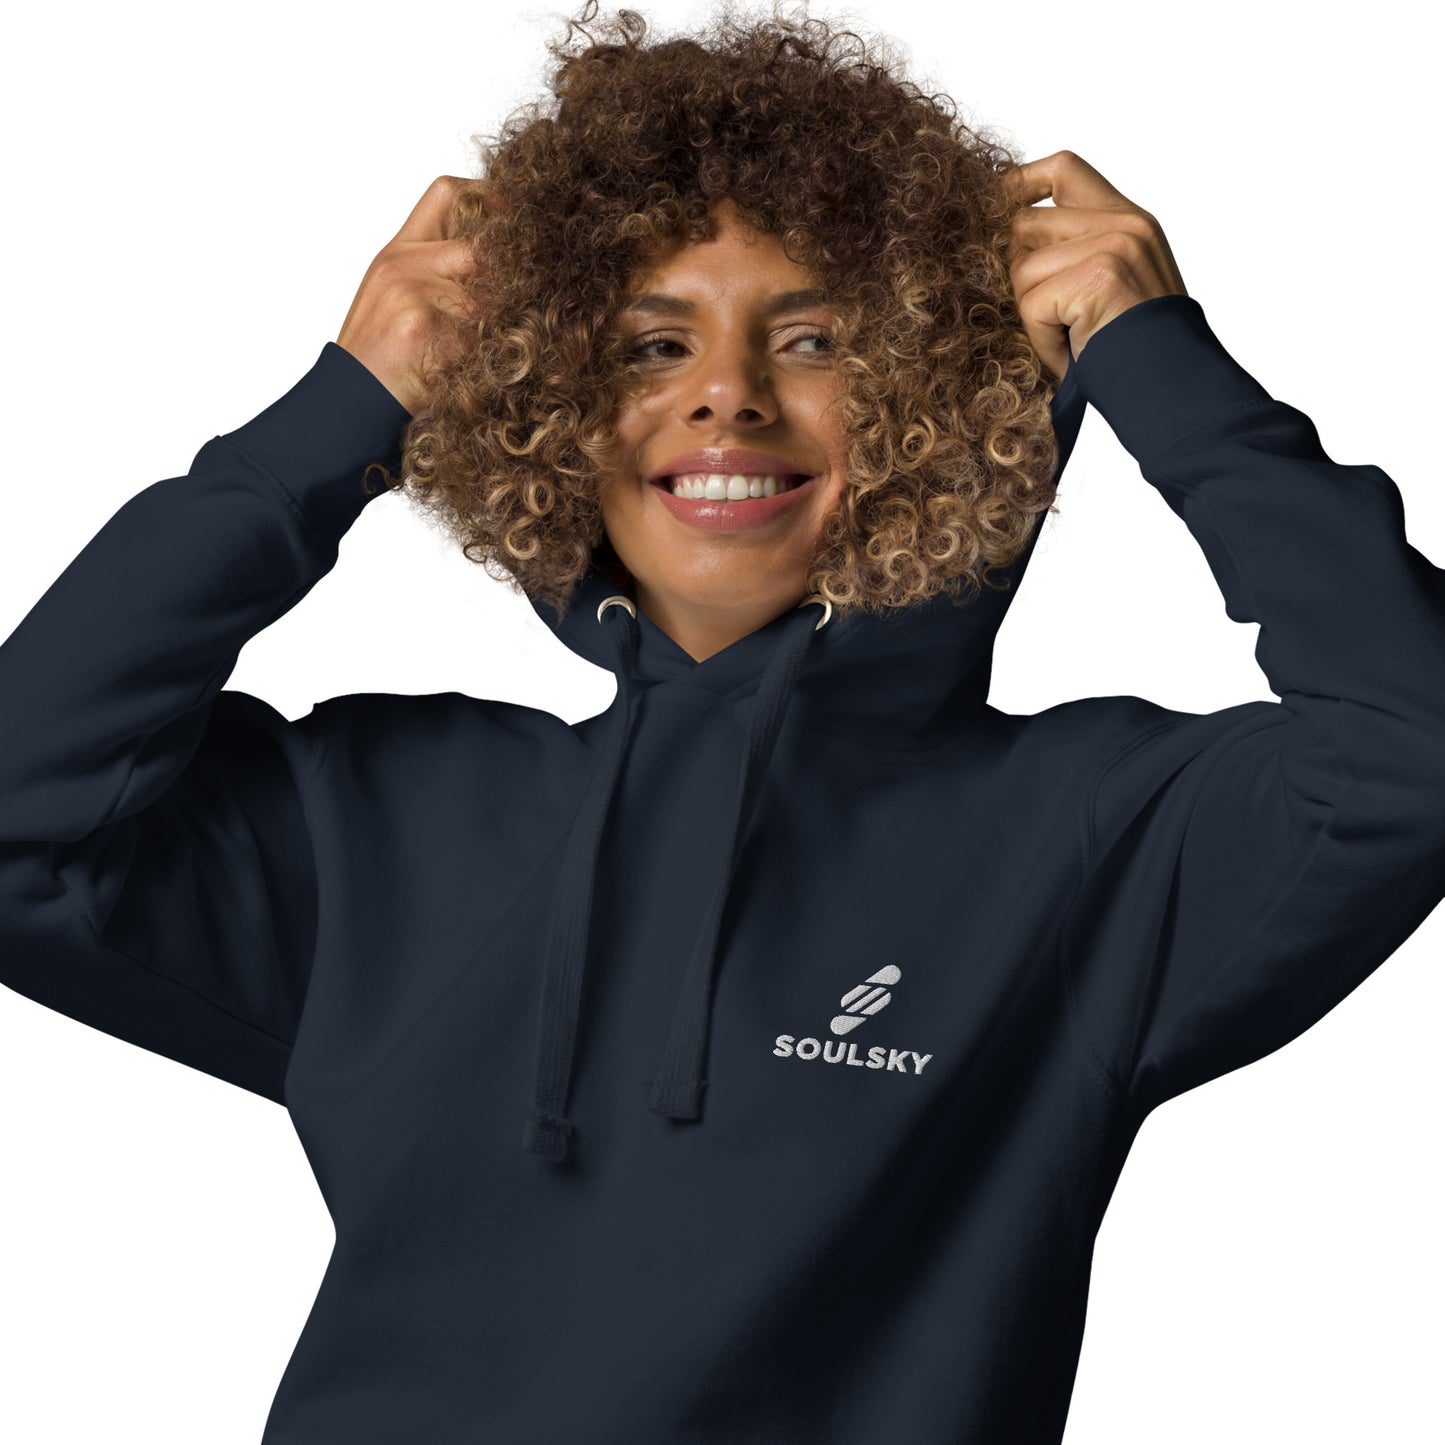 Embroidered Logo Popover Hoodie - Navy Blue